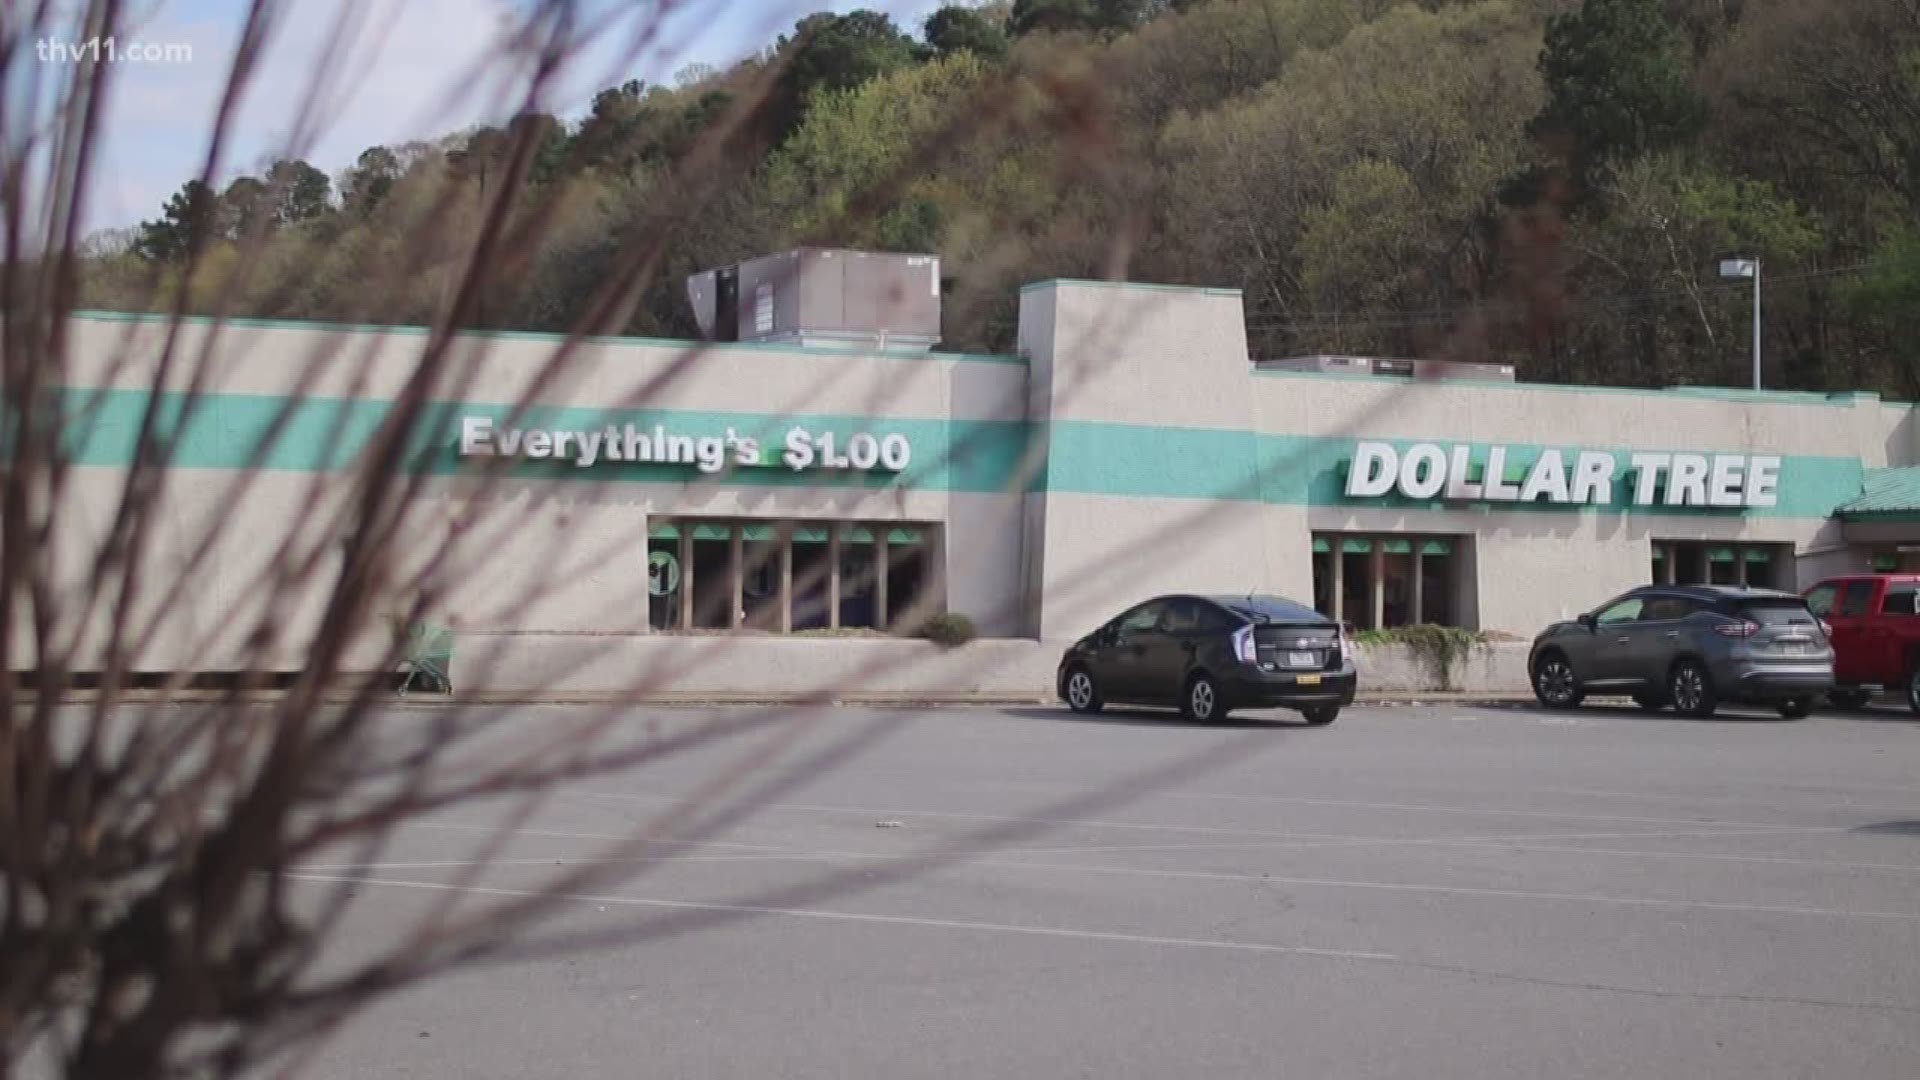 Something really special happened at a Little Rock Dollar Tree, and all it took was one man saying 'yes' to impact another man's life in an unimaginable way.